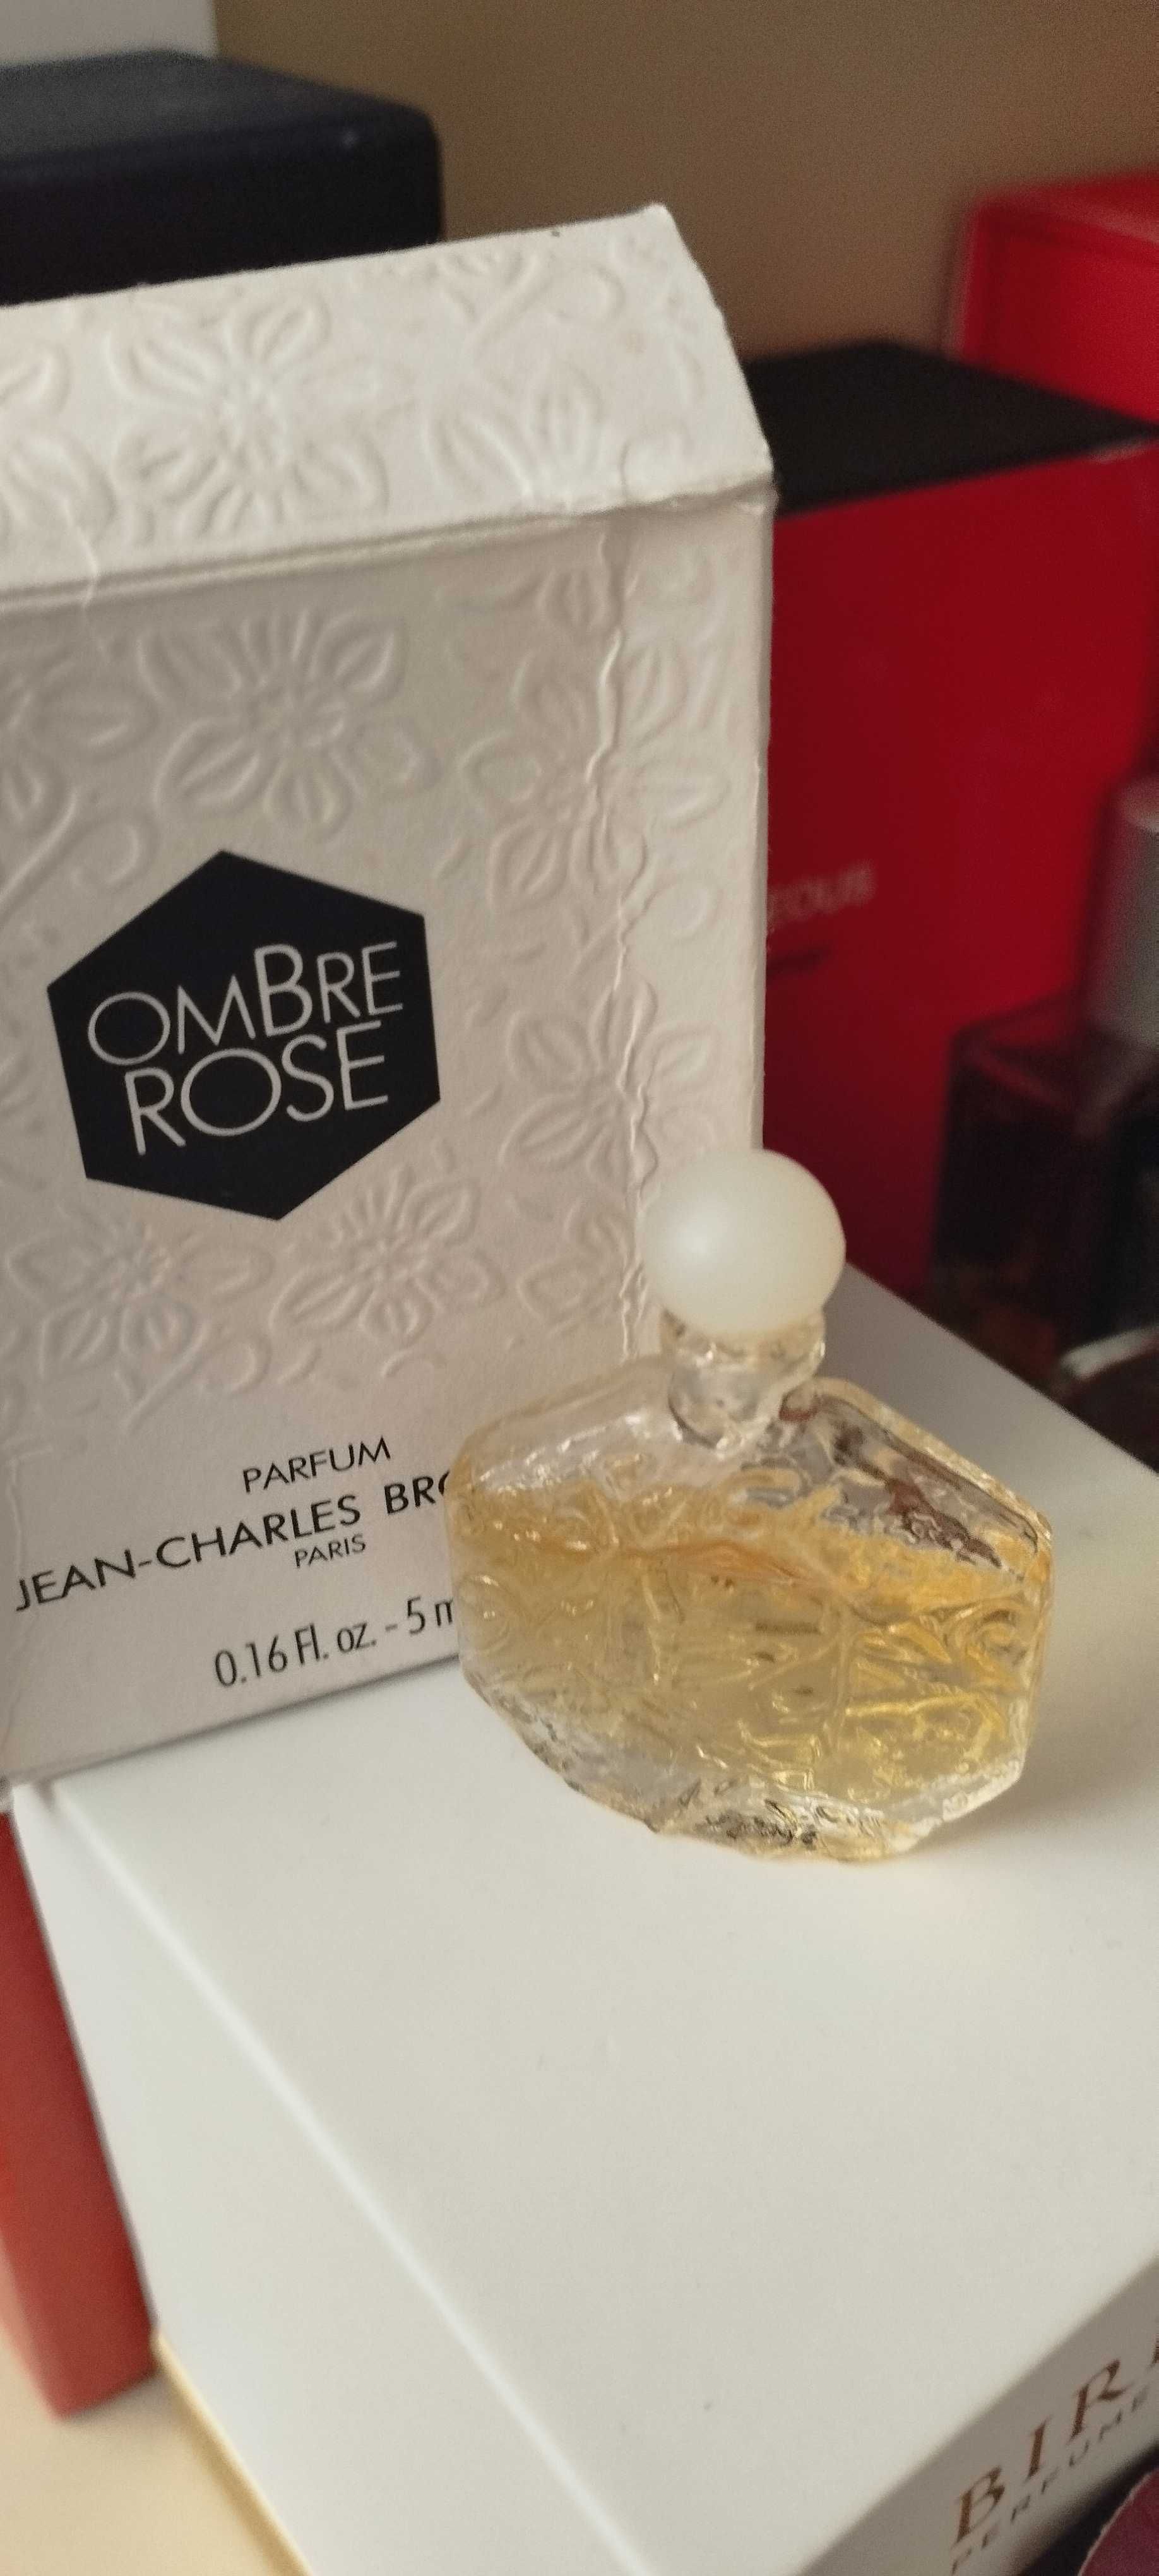 Ombre Rose Jean Charles Brosseau czyste perfumy